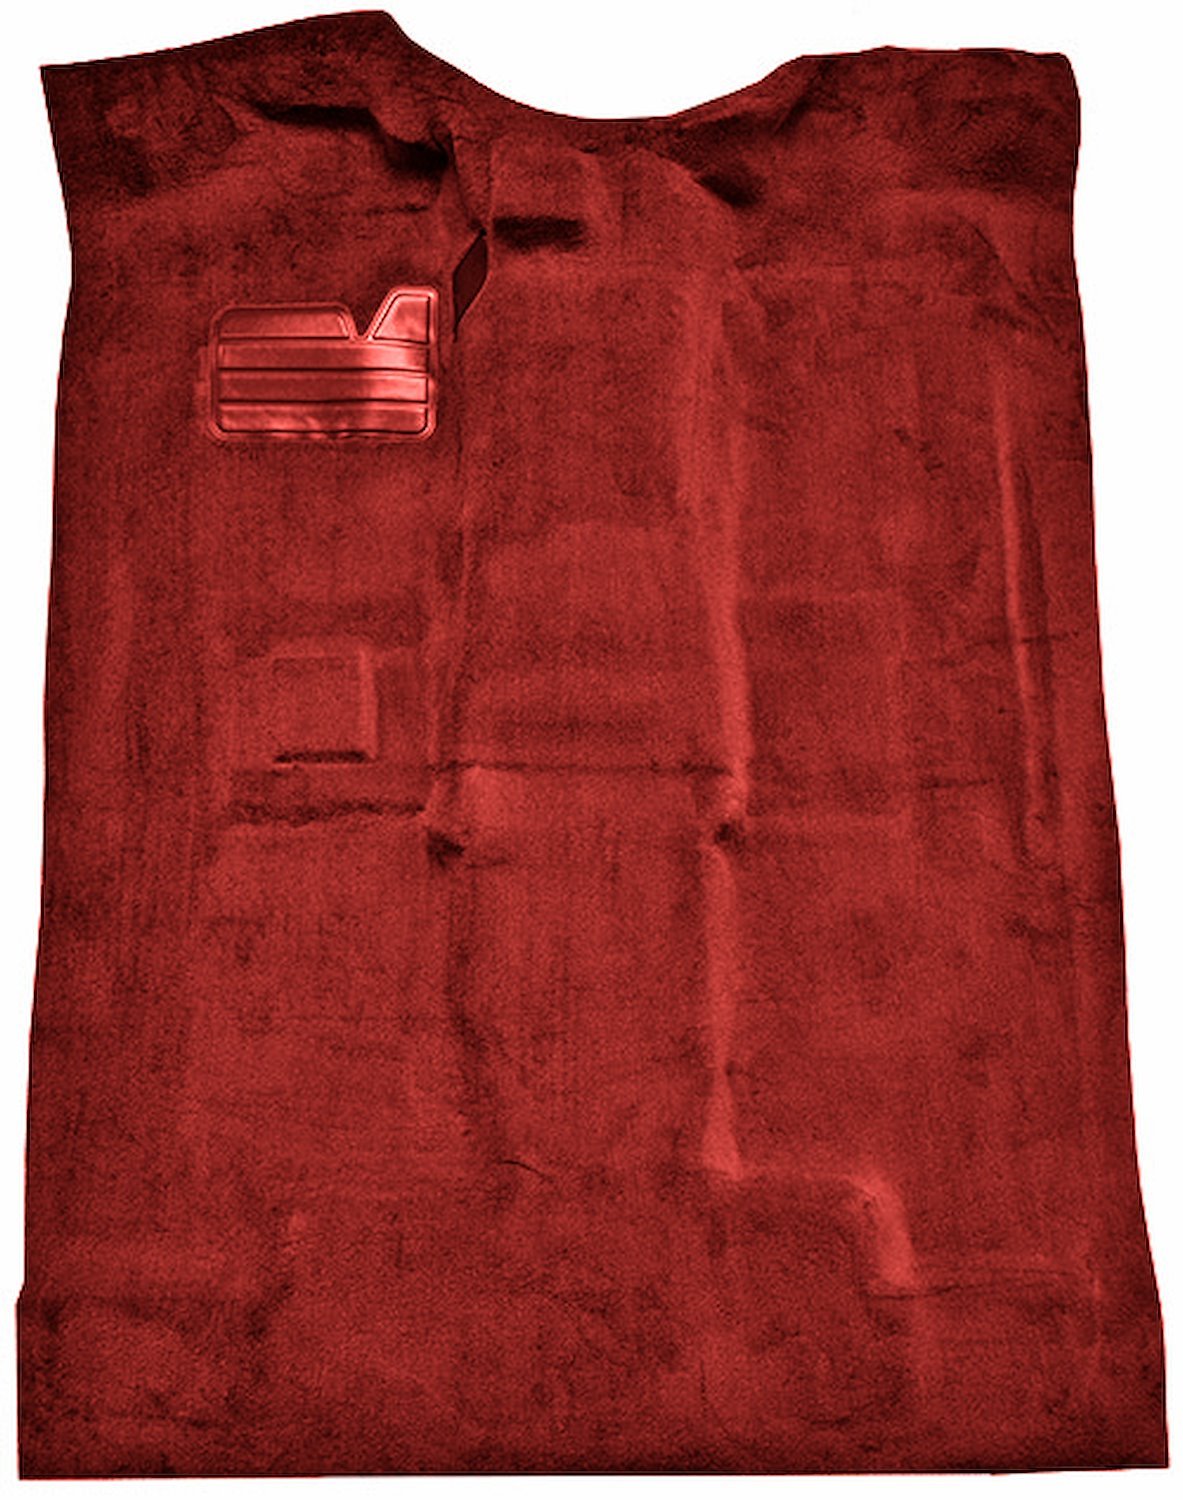 Molded Cut Pile Carpet Fits Select 1997-2002 Chevy/GMC Trucks [OE-Style Jute Backing, Extended Cab, 1-Piece, Claret/Oxblood]